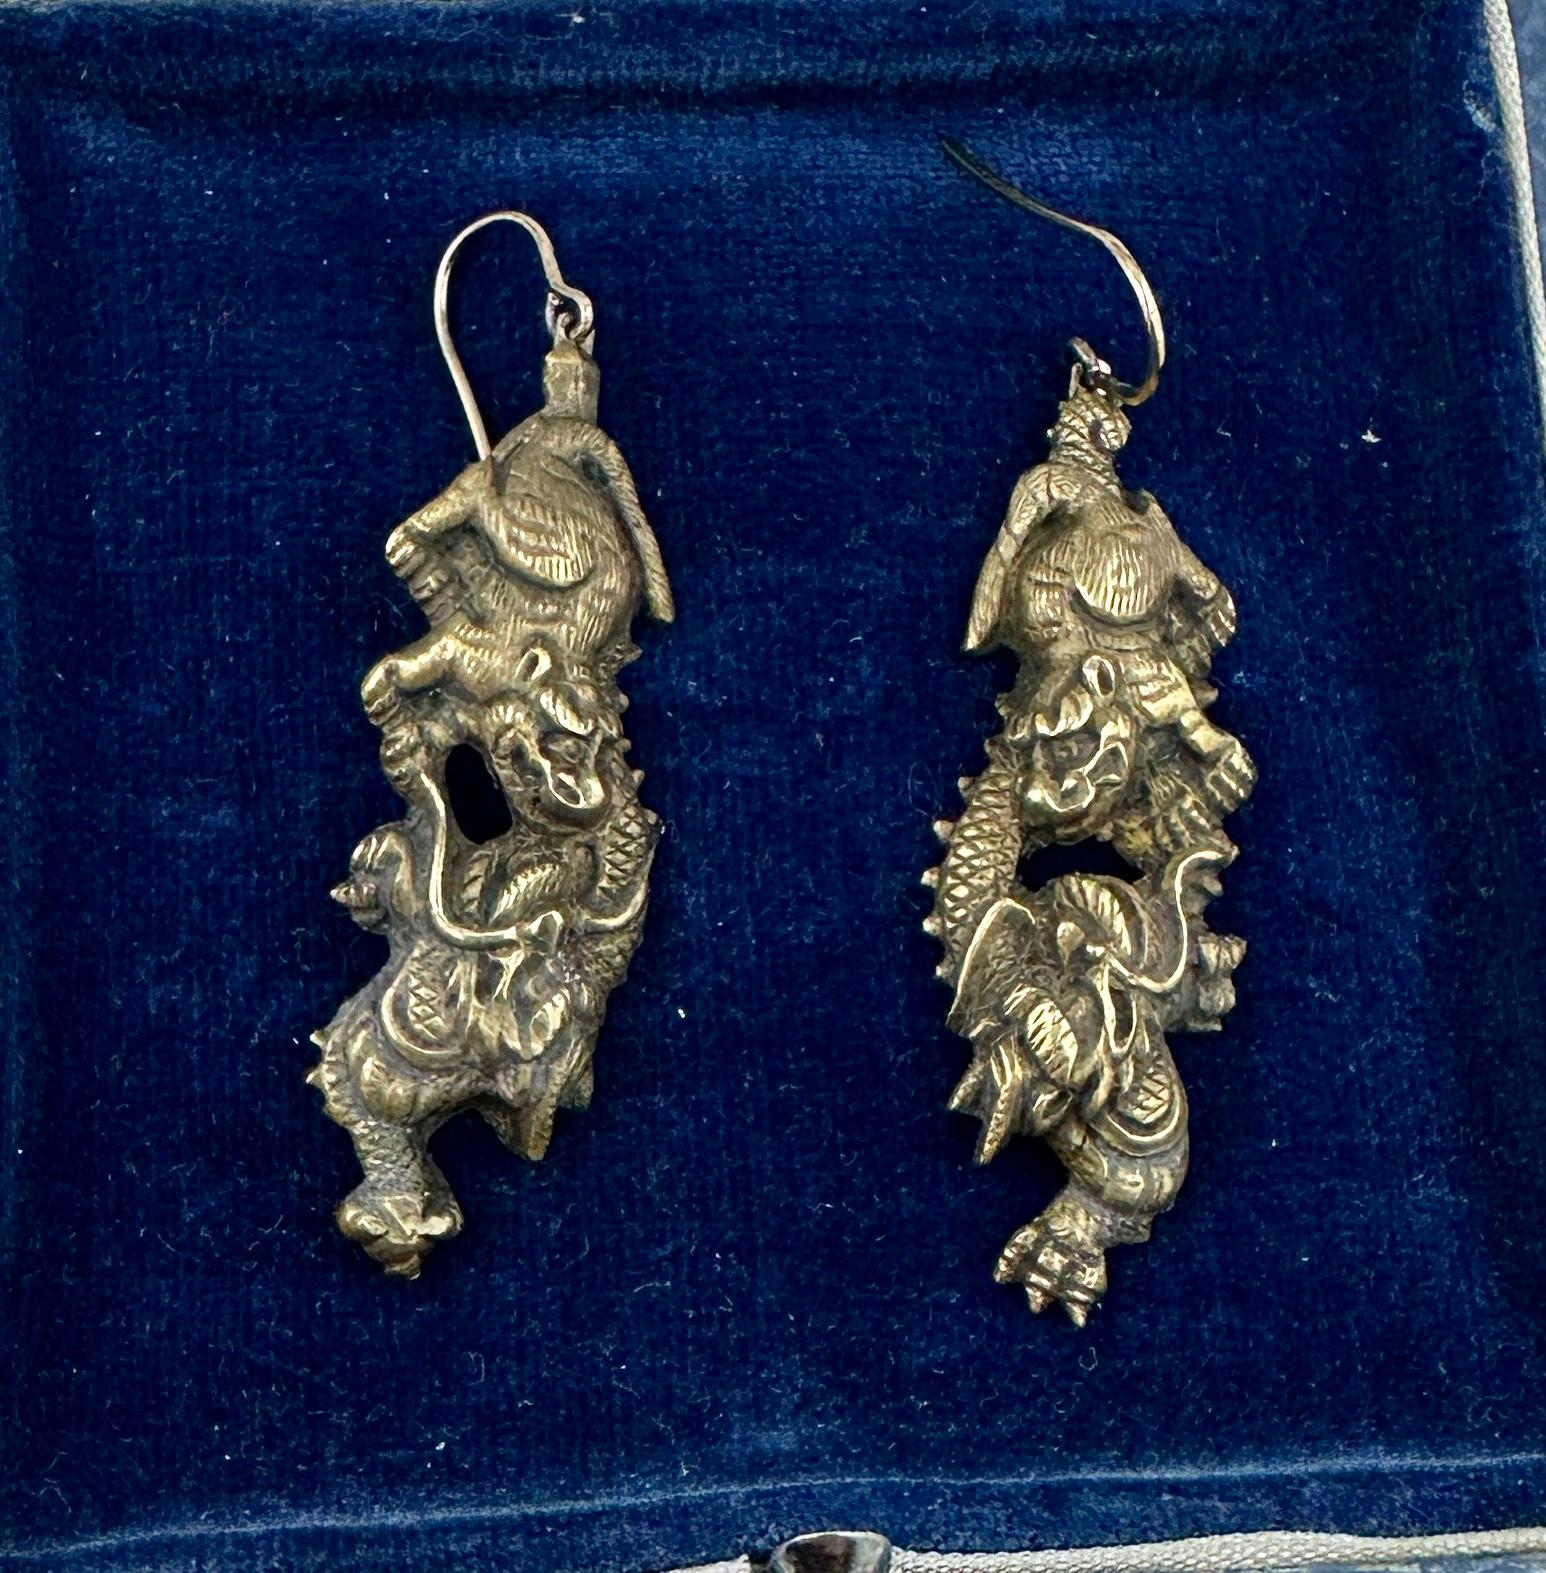 Dragon Foo Dog Shakudo Earrings Samurai Warrior Japan 14 Karat Gold Victorian In Excellent Condition For Sale In New York, NY